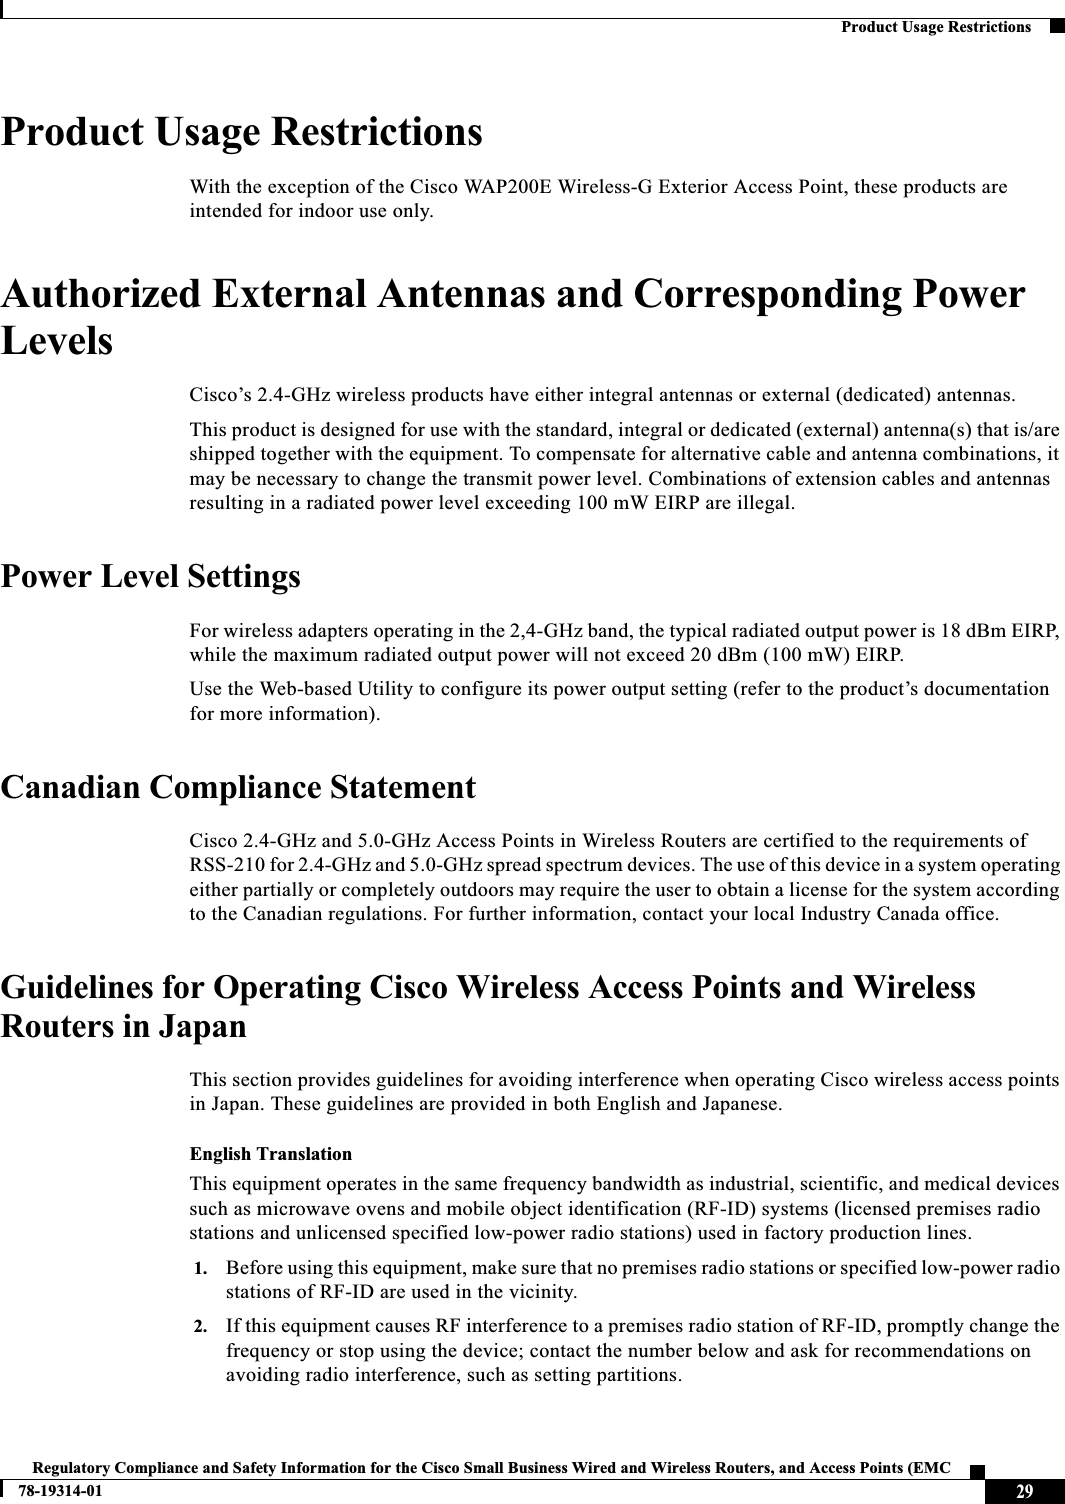 29Regulatory Compliance and Safety Information for the Cisco Small Business Wired and Wireless Routers, and Access Points (EMC 78-19314-01Product Usage RestrictionsProduct Usage RestrictionsWith the exception of the Cisco WAP200E Wireless-G Exterior Access Point, these products are intended for indoor use only.Authorized External Antennas and Corresponding Power LevelsCisco’s 2.4-GHz wireless products have either integral antennas or external (dedicated) antennas.This product is designed for use with the standard, integral or dedicated (external) antenna(s) that is/are shipped together with the equipment. To compensate for alternative cable and antenna combinations, it may be necessary to change the transmit power level. Combinations of extension cables and antennas resulting in a radiated power level exceeding 100 mW EIRP are illegal.Power Level SettingsFor wireless adapters operating in the 2,4-GHz band, the typical radiated output power is 18 dBm EIRP, while the maximum radiated output power will not exceed 20 dBm (100 mW) EIRP.Use the Web-based Utility to configure its power output setting (refer to the product’s documentation for more information).Canadian Compliance StatementCisco 2.4-GHz and 5.0-GHz Access Points in Wireless Routers are certified to the requirements of RSS-210 for 2.4-GHz and 5.0-GHz spread spectrum devices. The use of this device in a system operating either partially or completely outdoors may require the user to obtain a license for the system according to the Canadian regulations. For further information, contact your local Industry Canada office.Guidelines for Operating Cisco Wireless Access Points and Wireless Routers in JapanThis section provides guidelines for avoiding interference when operating Cisco wireless access points in Japan. These guidelines are provided in both English and Japanese.English TranslationThis equipment operates in the same frequency bandwidth as industrial, scientific, and medical devices such as microwave ovens and mobile object identification (RF-ID) systems (licensed premises radio stations and unlicensed specified low-power radio stations) used in factory production lines.1. Before using this equipment, make sure that no premises radio stations or specified low-power radio stations of RF-ID are used in the vicinity.2. If this equipment causes RF interference to a premises radio station of RF-ID, promptly change the frequency or stop using the device; contact the number below and ask for recommendations on avoiding radio interference, such as setting partitions.